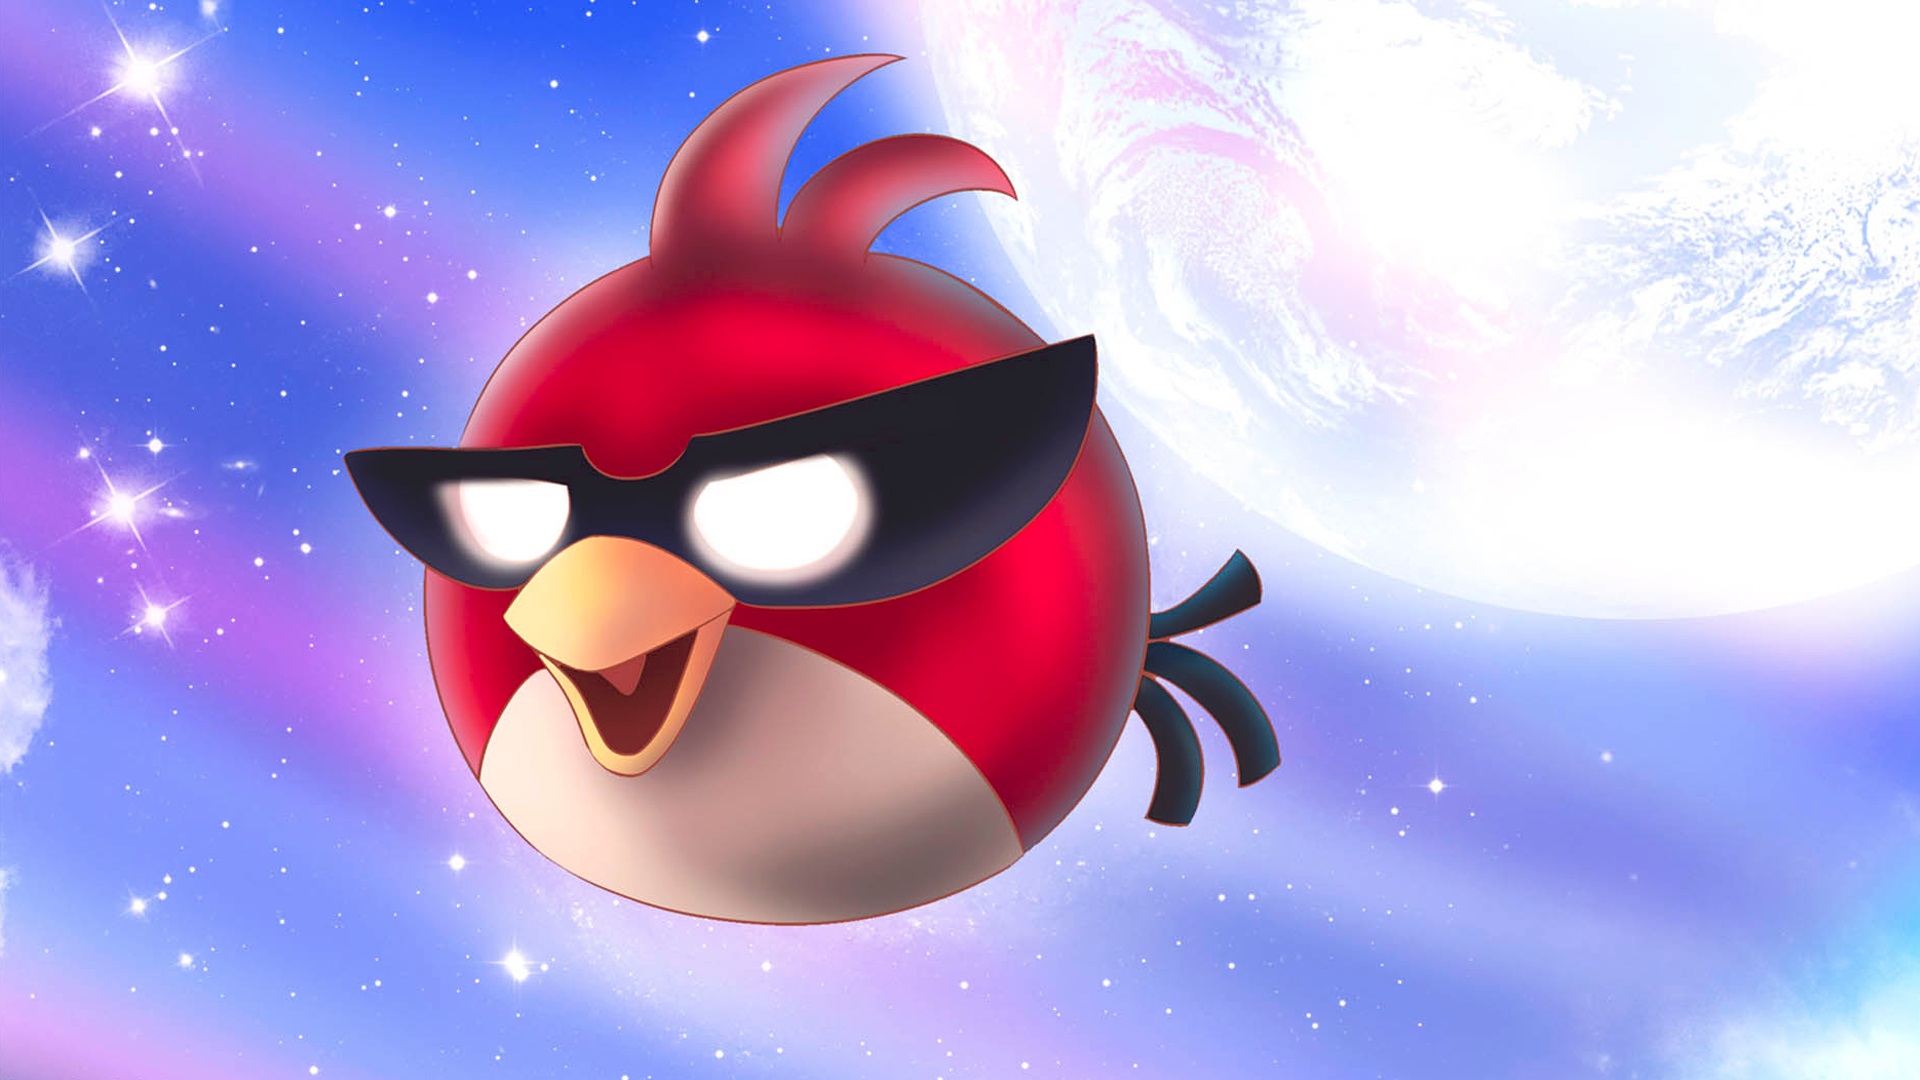 Wallpaper 18 Wallpaper From Angry Birds Space Gamepressure Com Images, Photos, Reviews